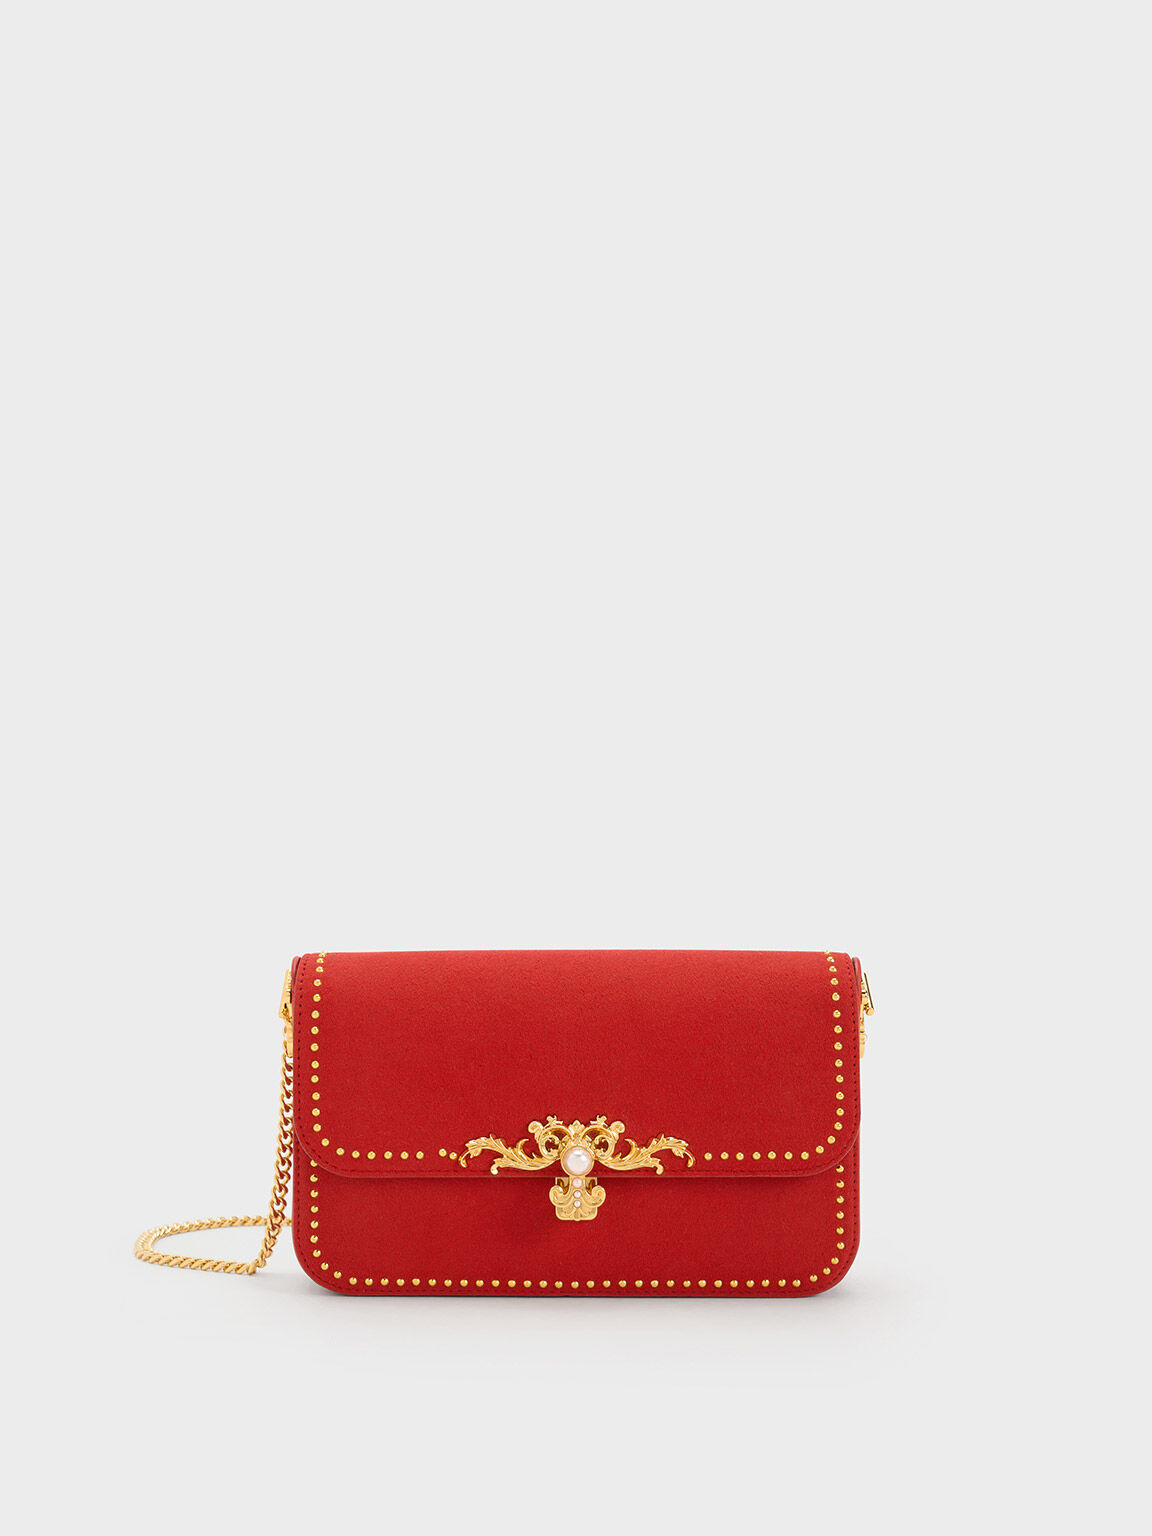 Merial Metallic Accent Studded Clutch, Red, hi-res